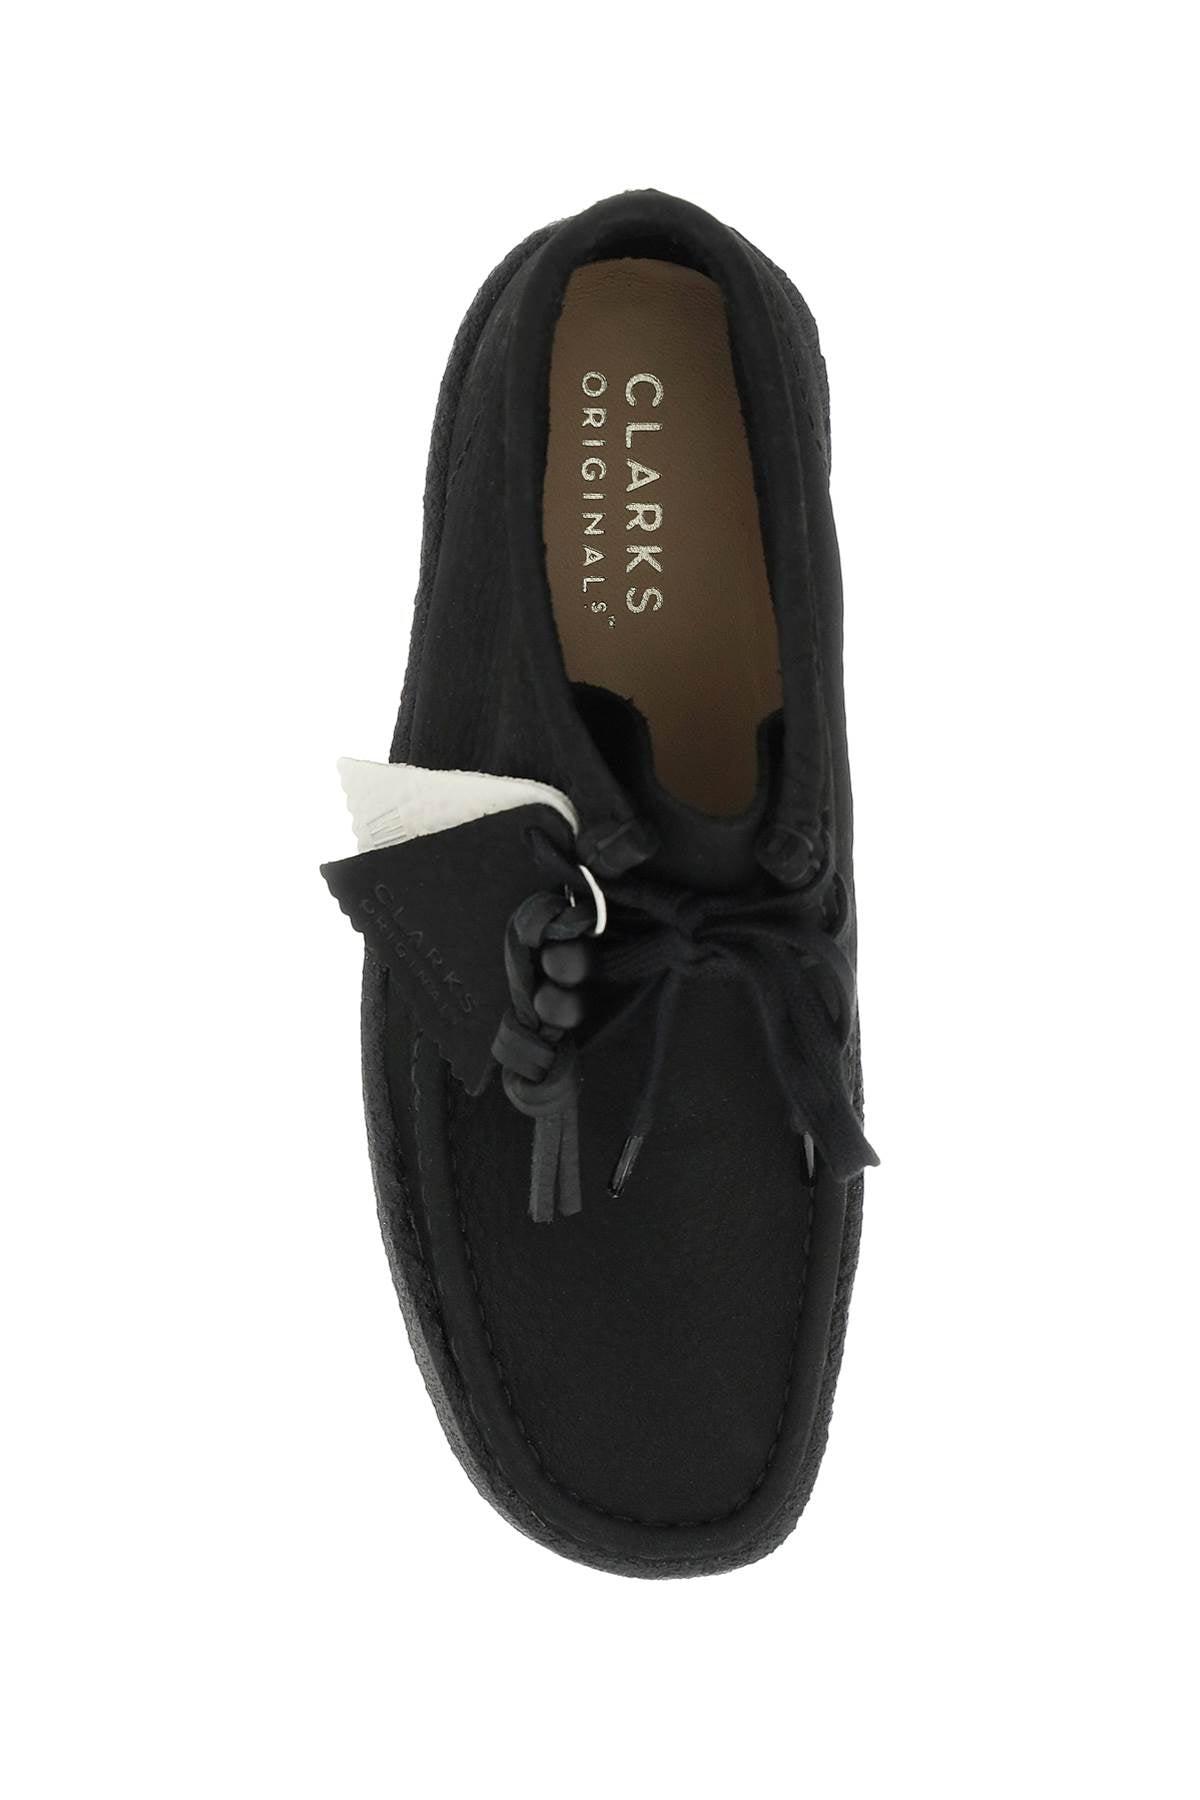 Clarks Wallabee Cup Hi-top Lace-up Shoes in Black | Lyst